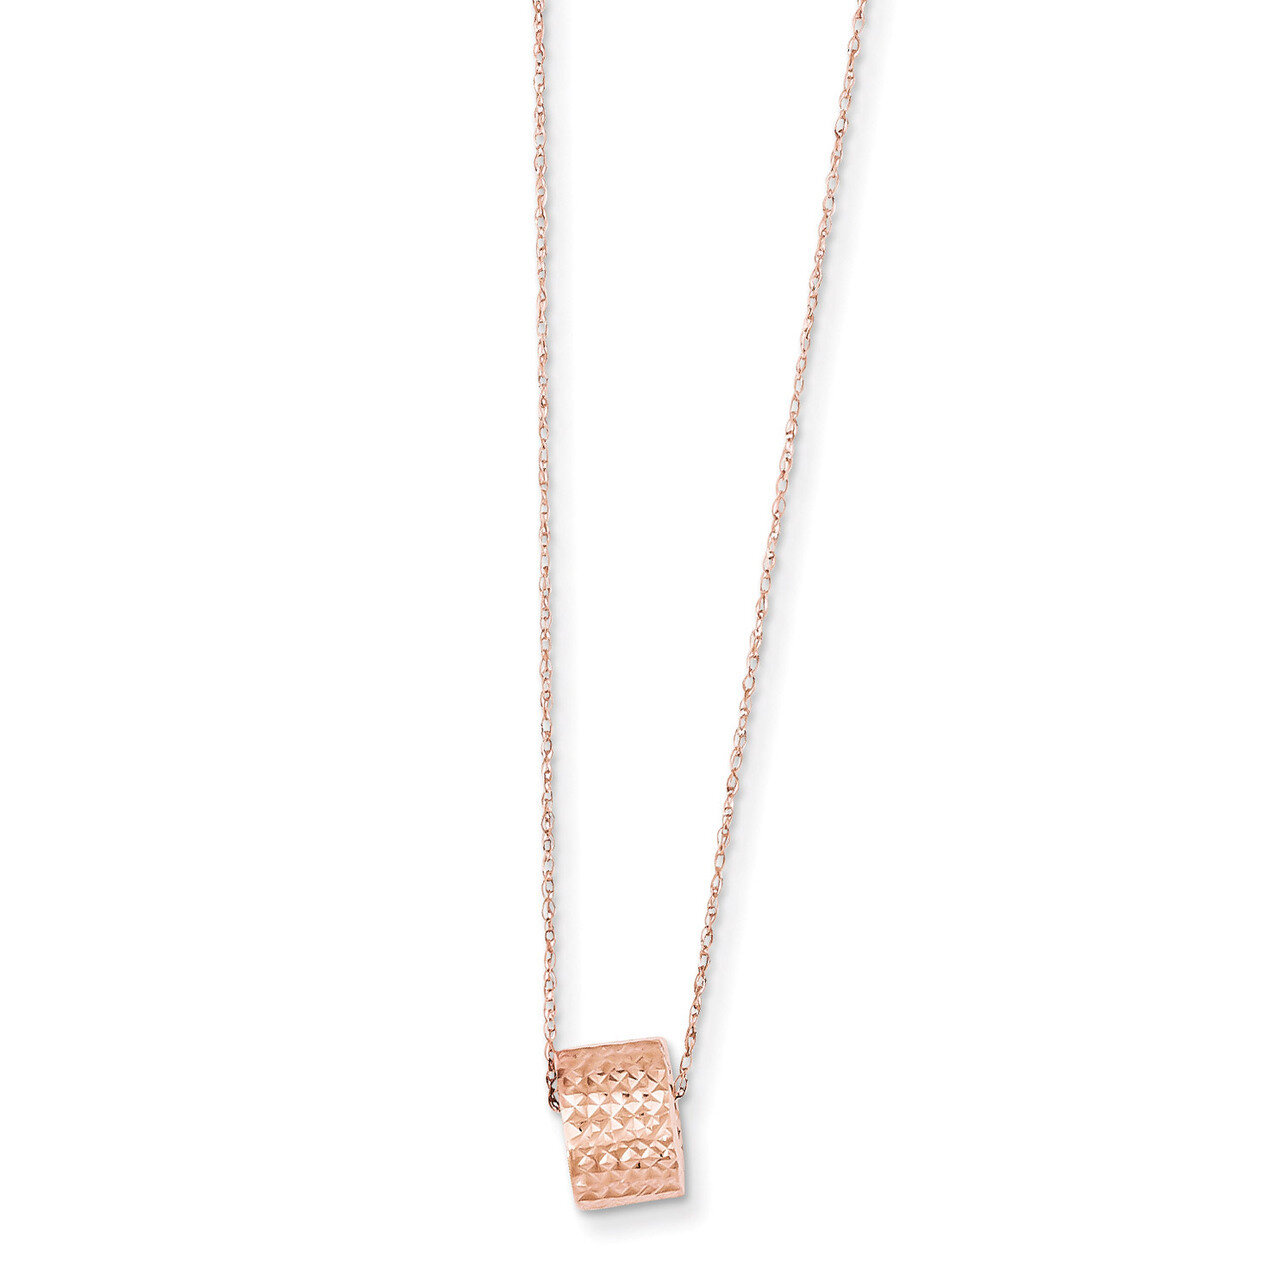 Rose Gold 8.5mm Diamond Cut Bead with 2in Ext Necklace 14K SF2063-16